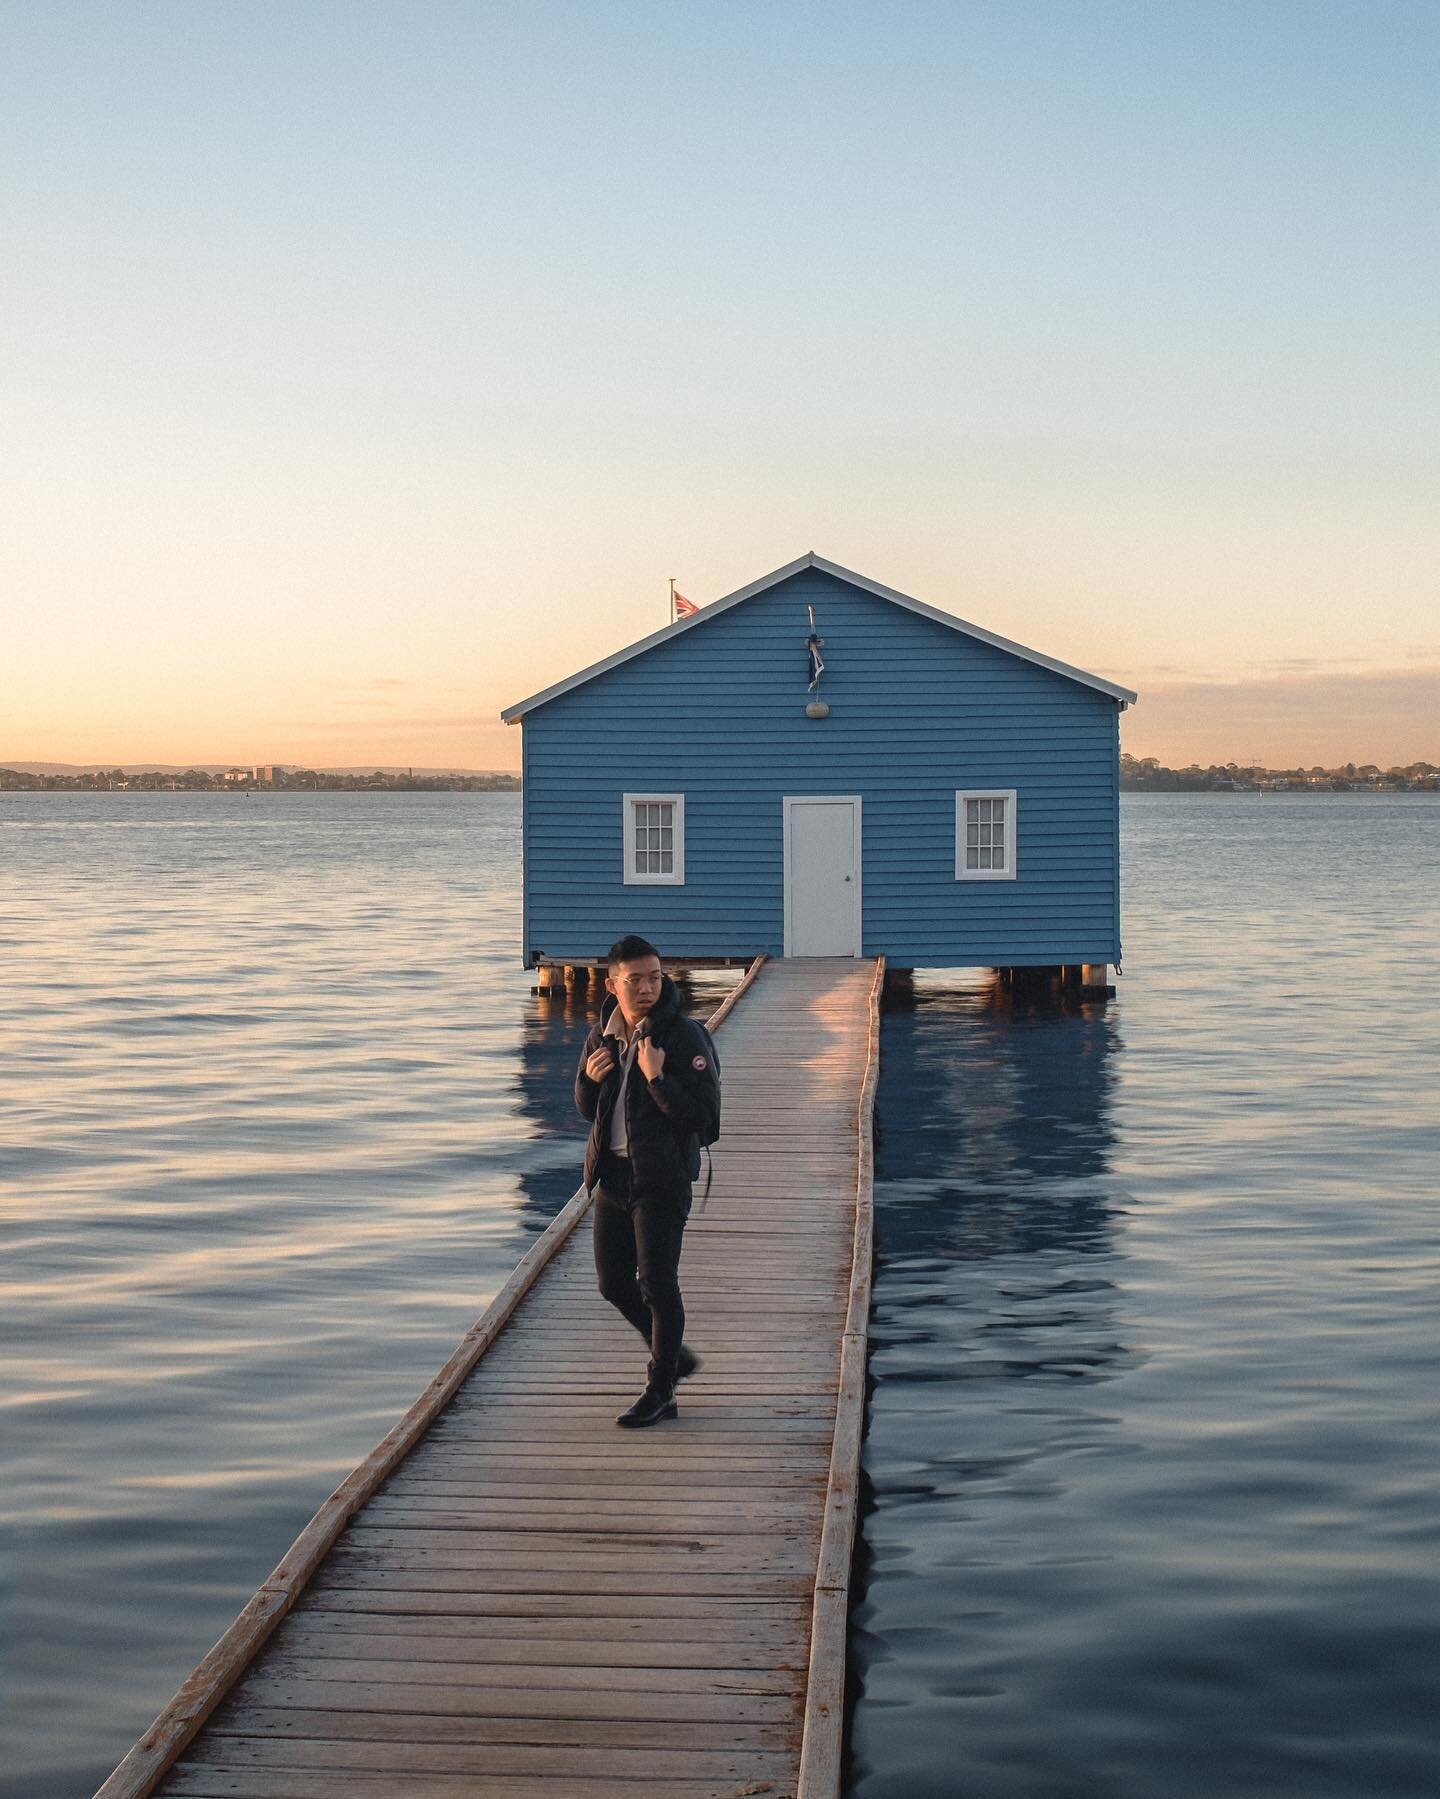 The Blue Boathouse at Sunrise - The sun rises at 7am in Perth, and I was on Brisbane time so I could get up for the sunrise without any issue 😆
FYI, no parking, so your best bet to get there is via Uber. 

#perthvibes #seeperth #visitperth #soperth 